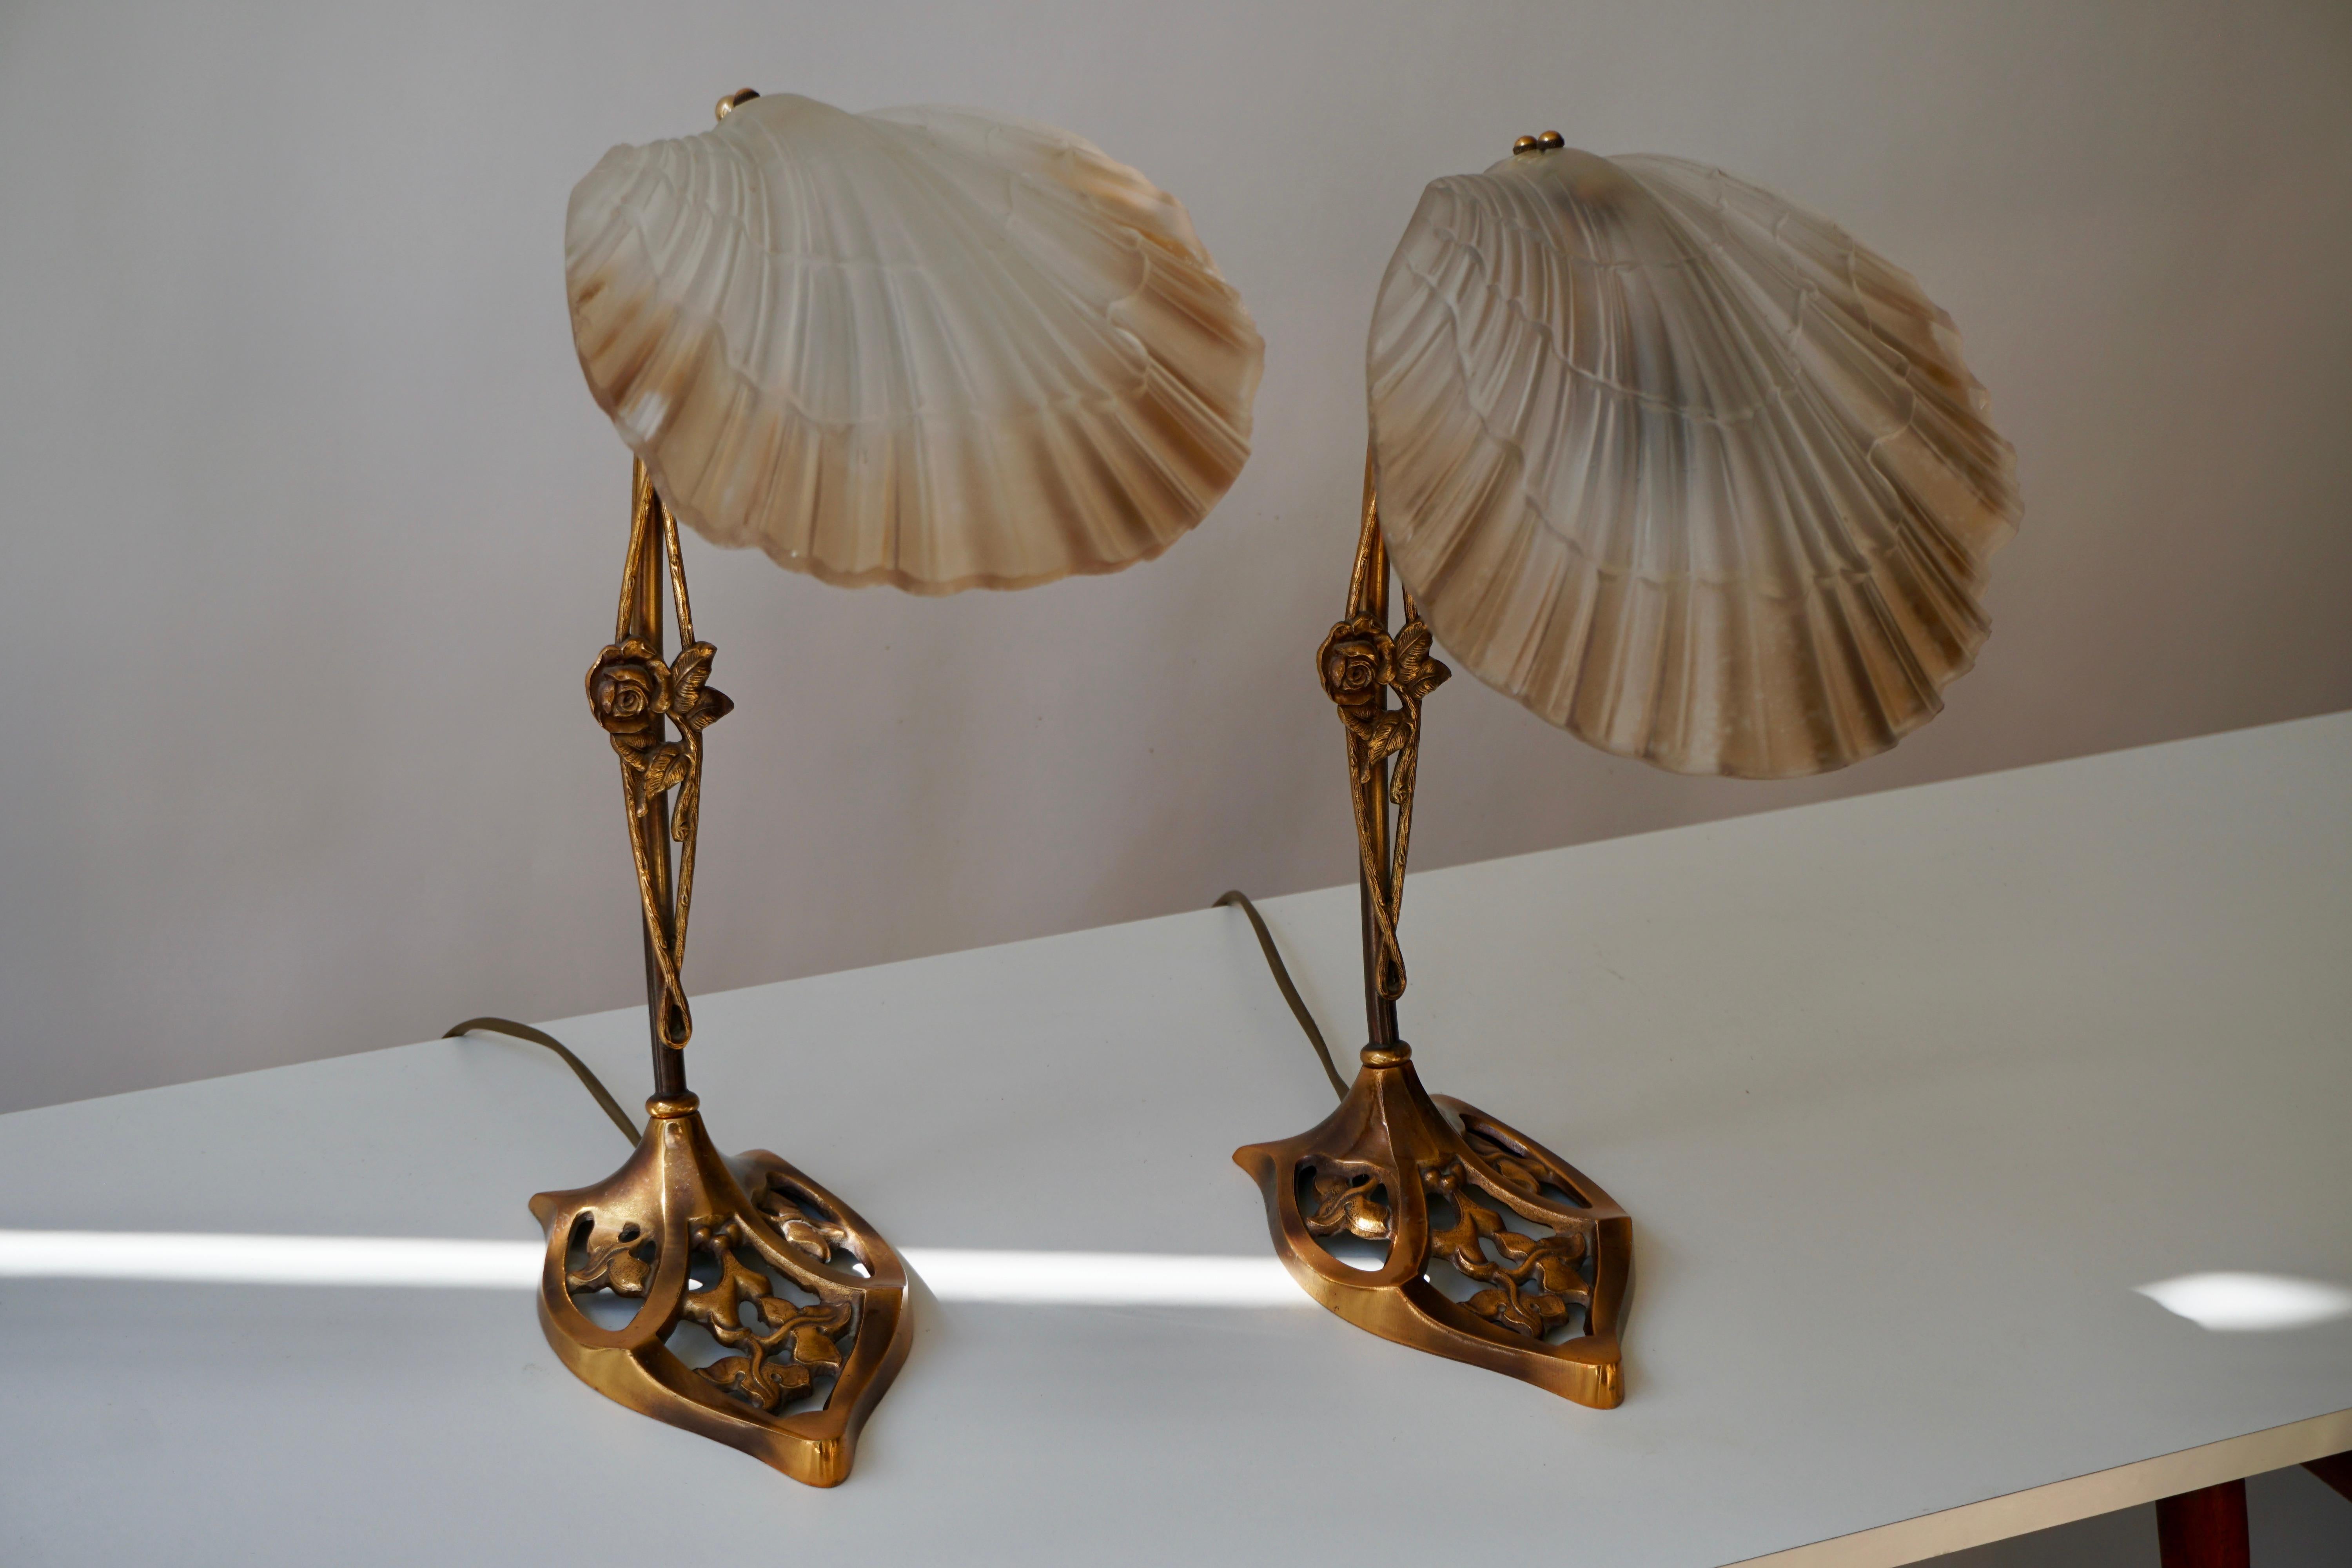 French Art Nouveau style / Deco table / desk lamp in glass and solid bronze.